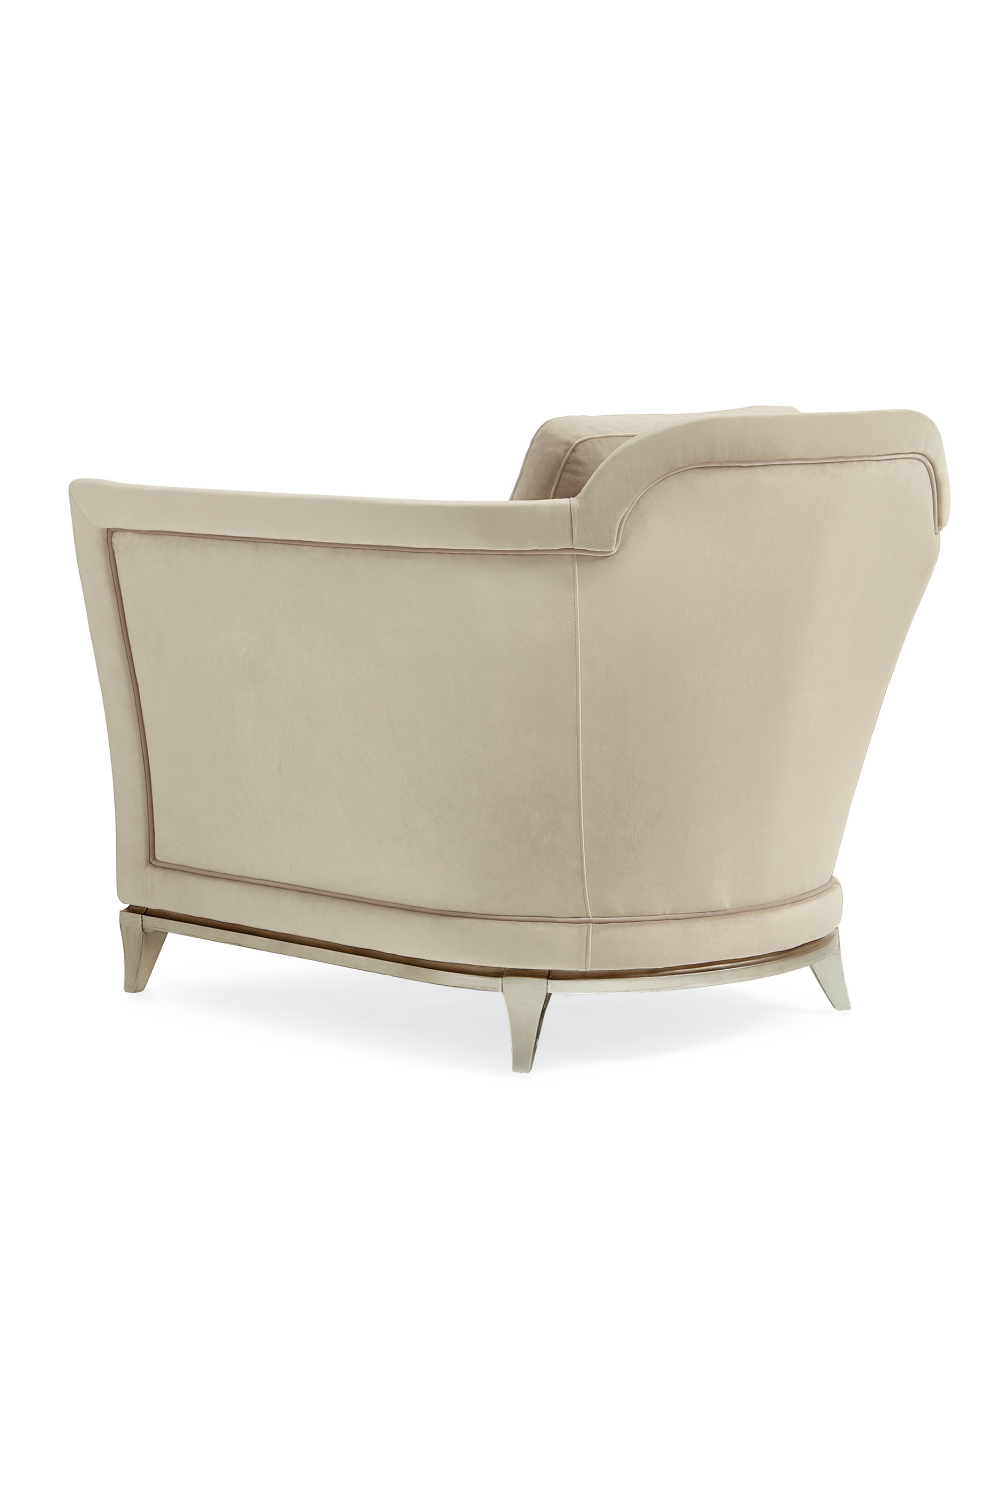 Velvet Modern Lounge Chair | Caracole Bend The Rules | Oroa.com